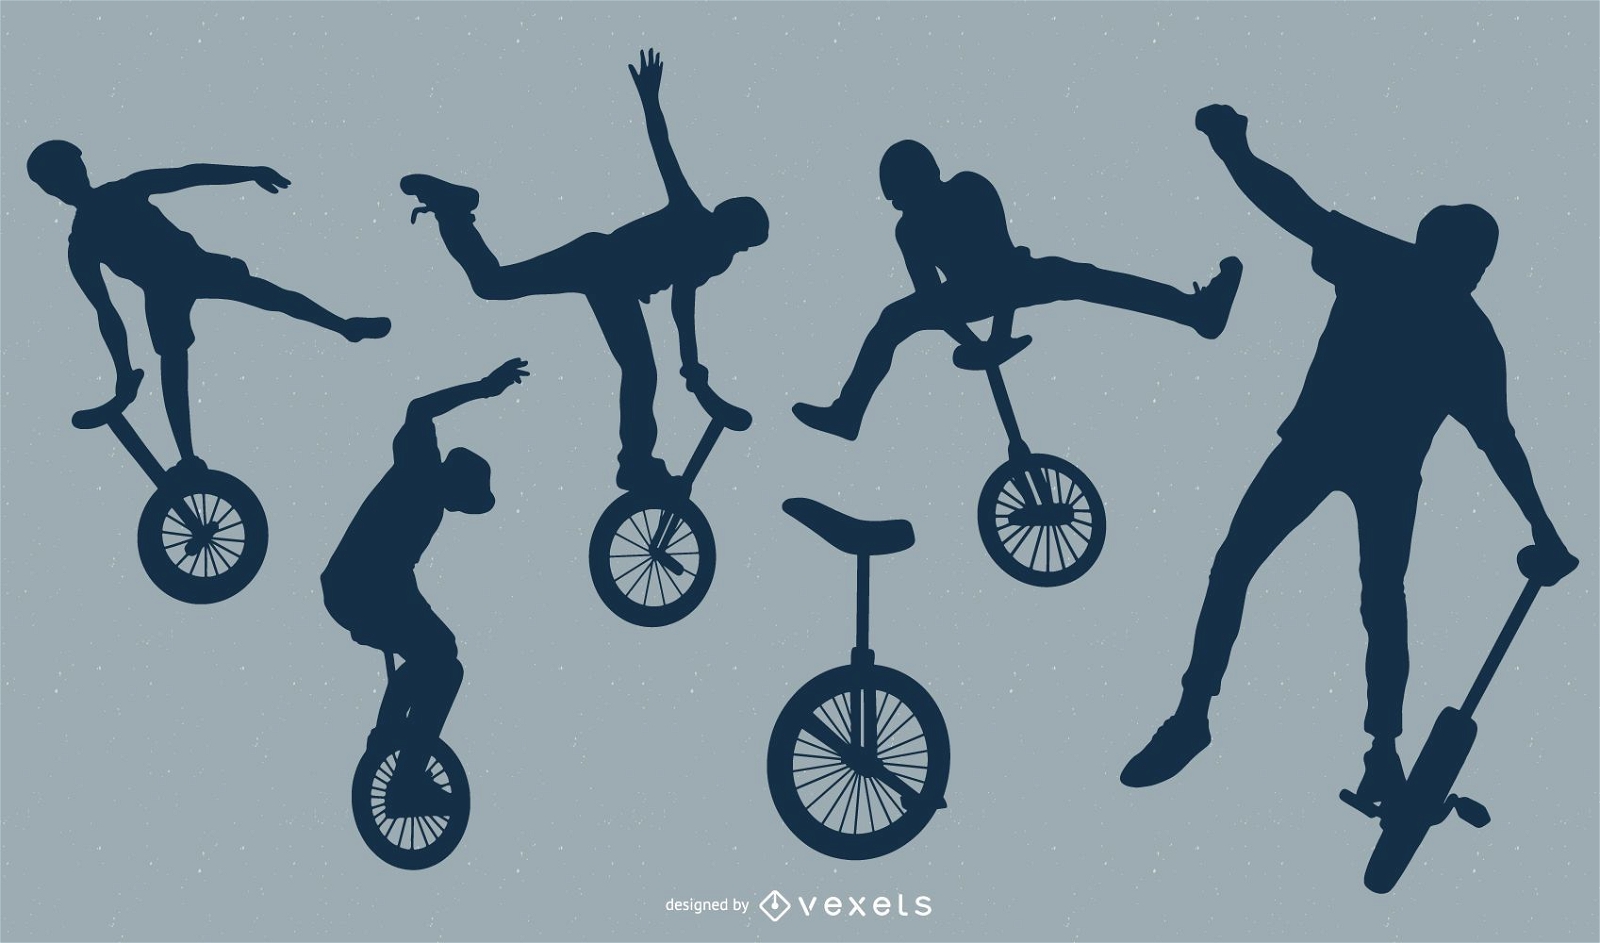 Unicycle Stunt People Silhouette Pack